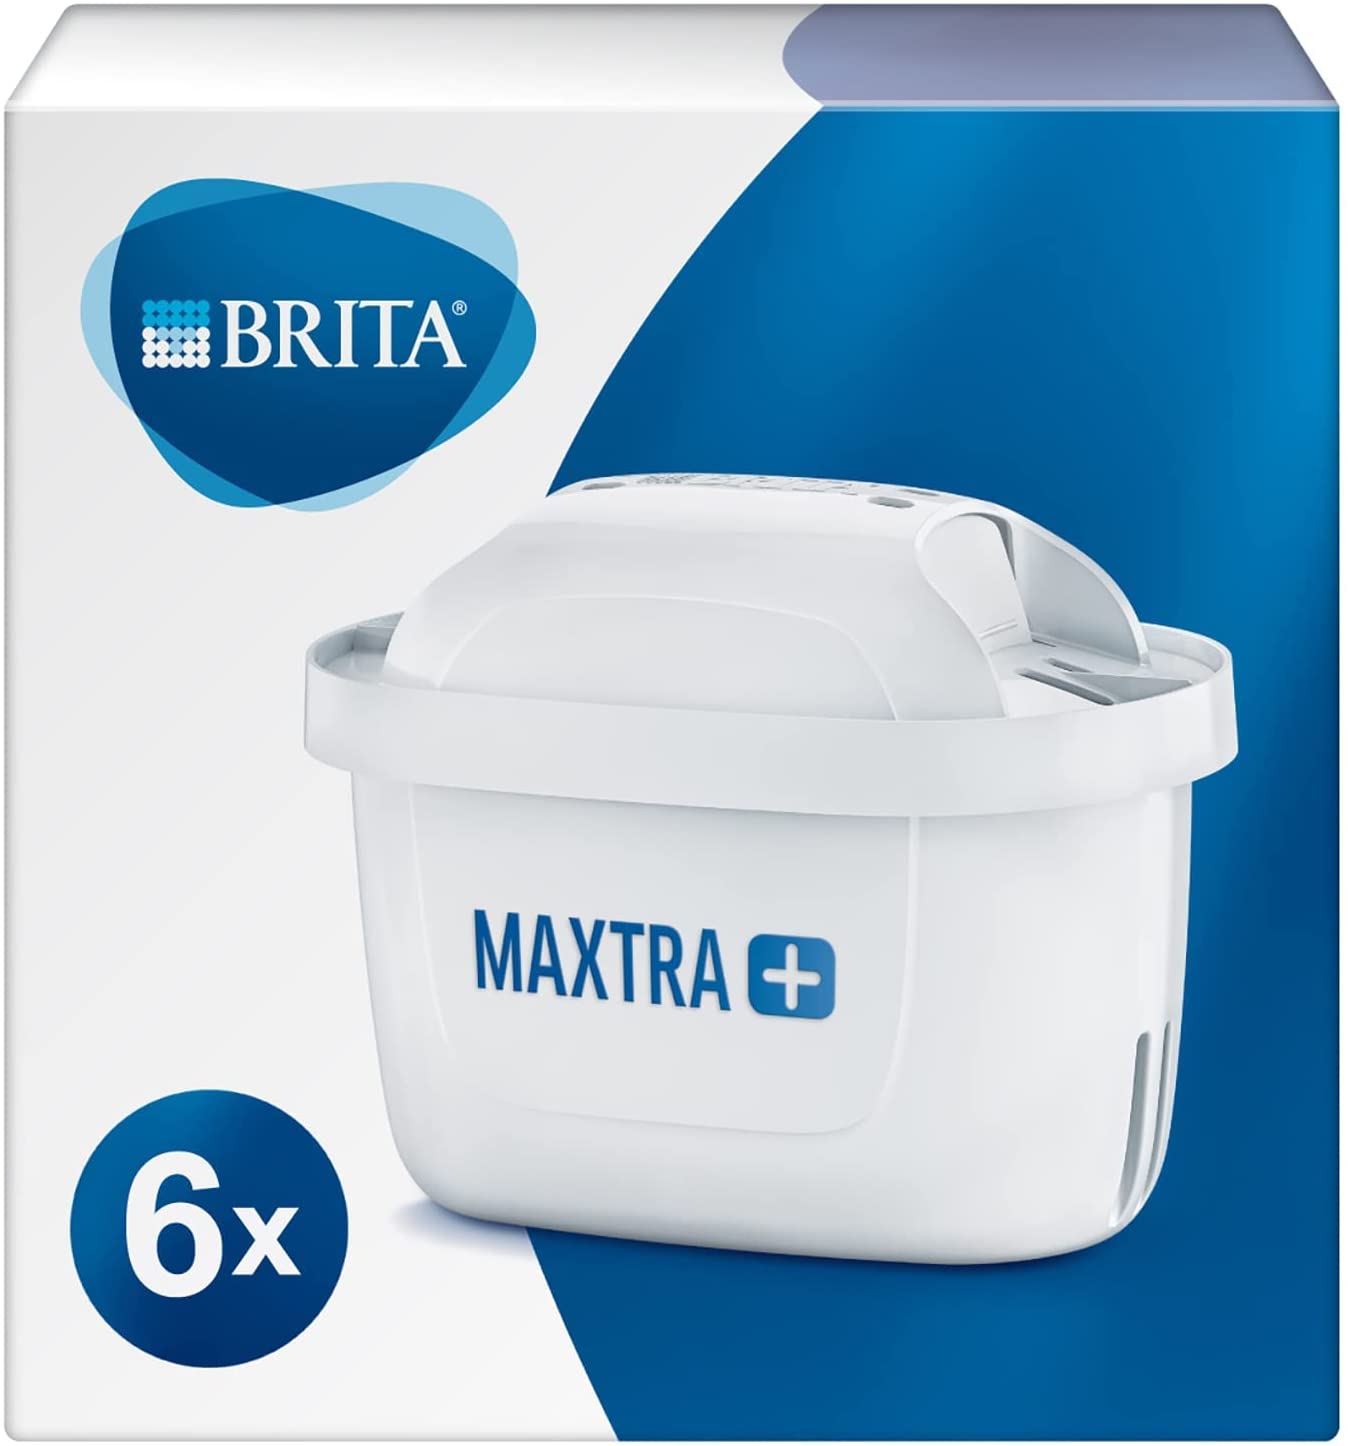 BRITA MAXTRA + Replacement Water Filter Cartridges , Compatible with all BRITA Jugs - Reduce Chlorine , Limescale and Impurities for Great Taste - Pack of 6